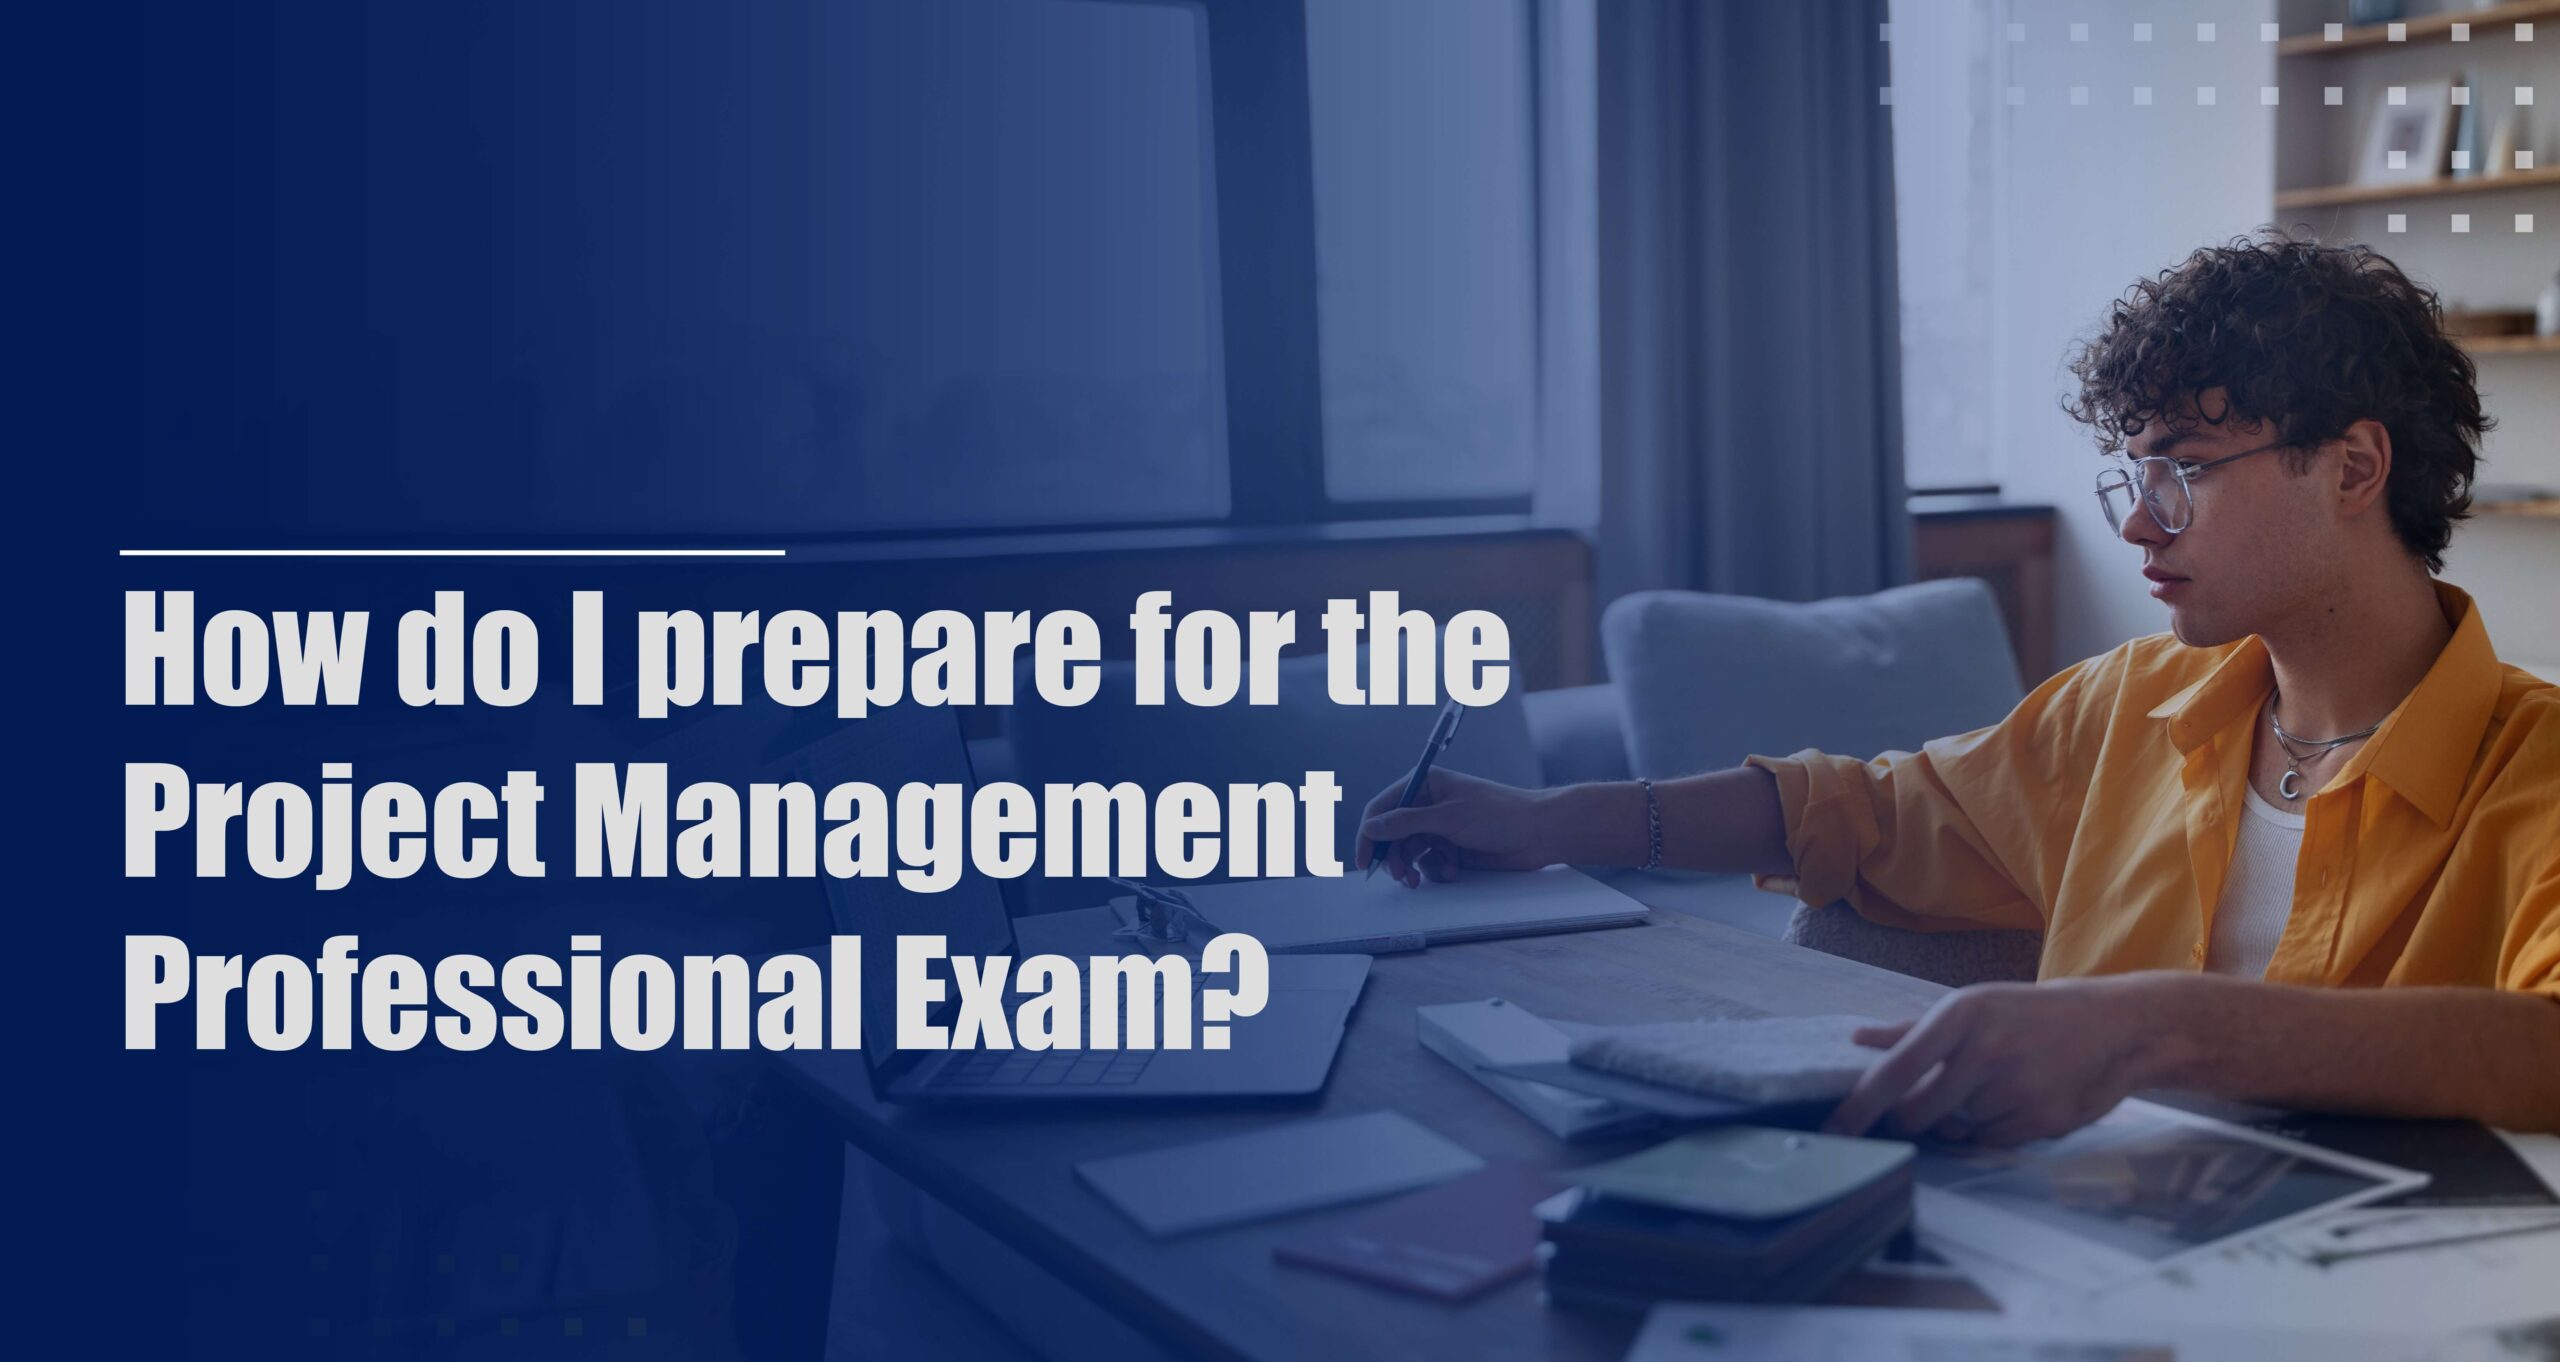 How do I prepare for the Project Management Professional Exam?